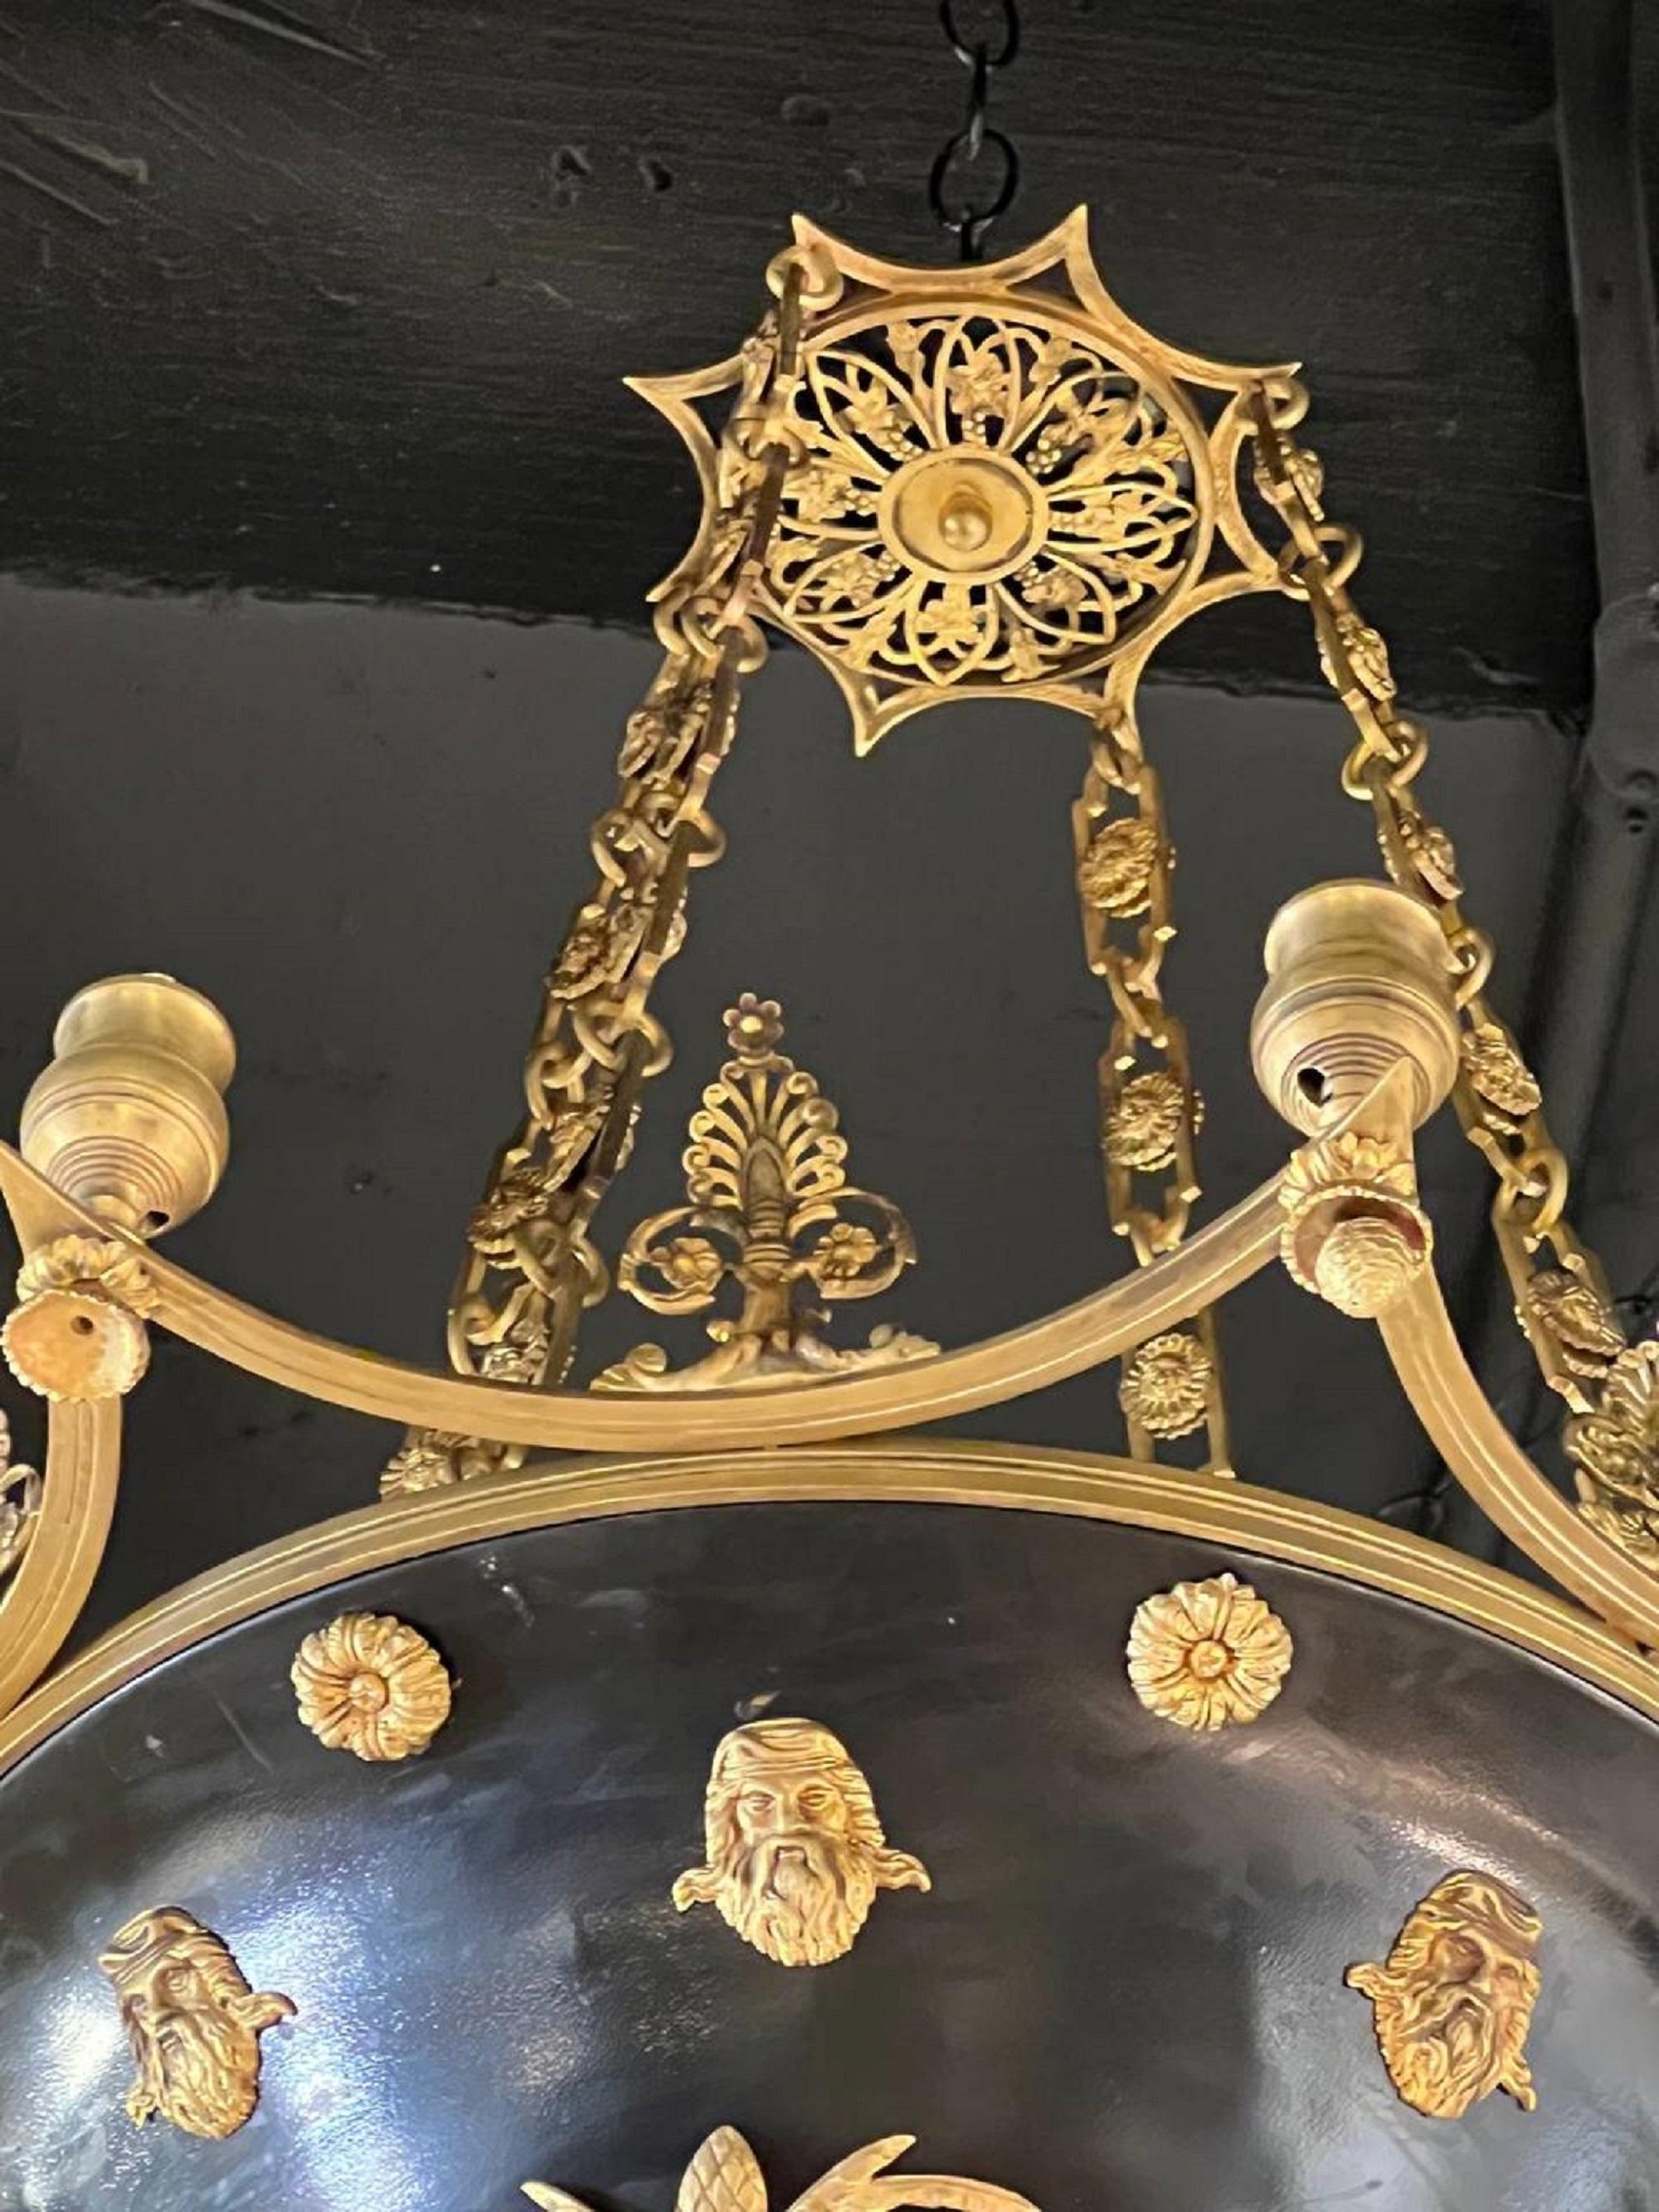 A late 19th century Empire 8 lights chandelier it’s unusual bronze fittings, from Waldorf Hotel in NYC.
Dealer: G302YP